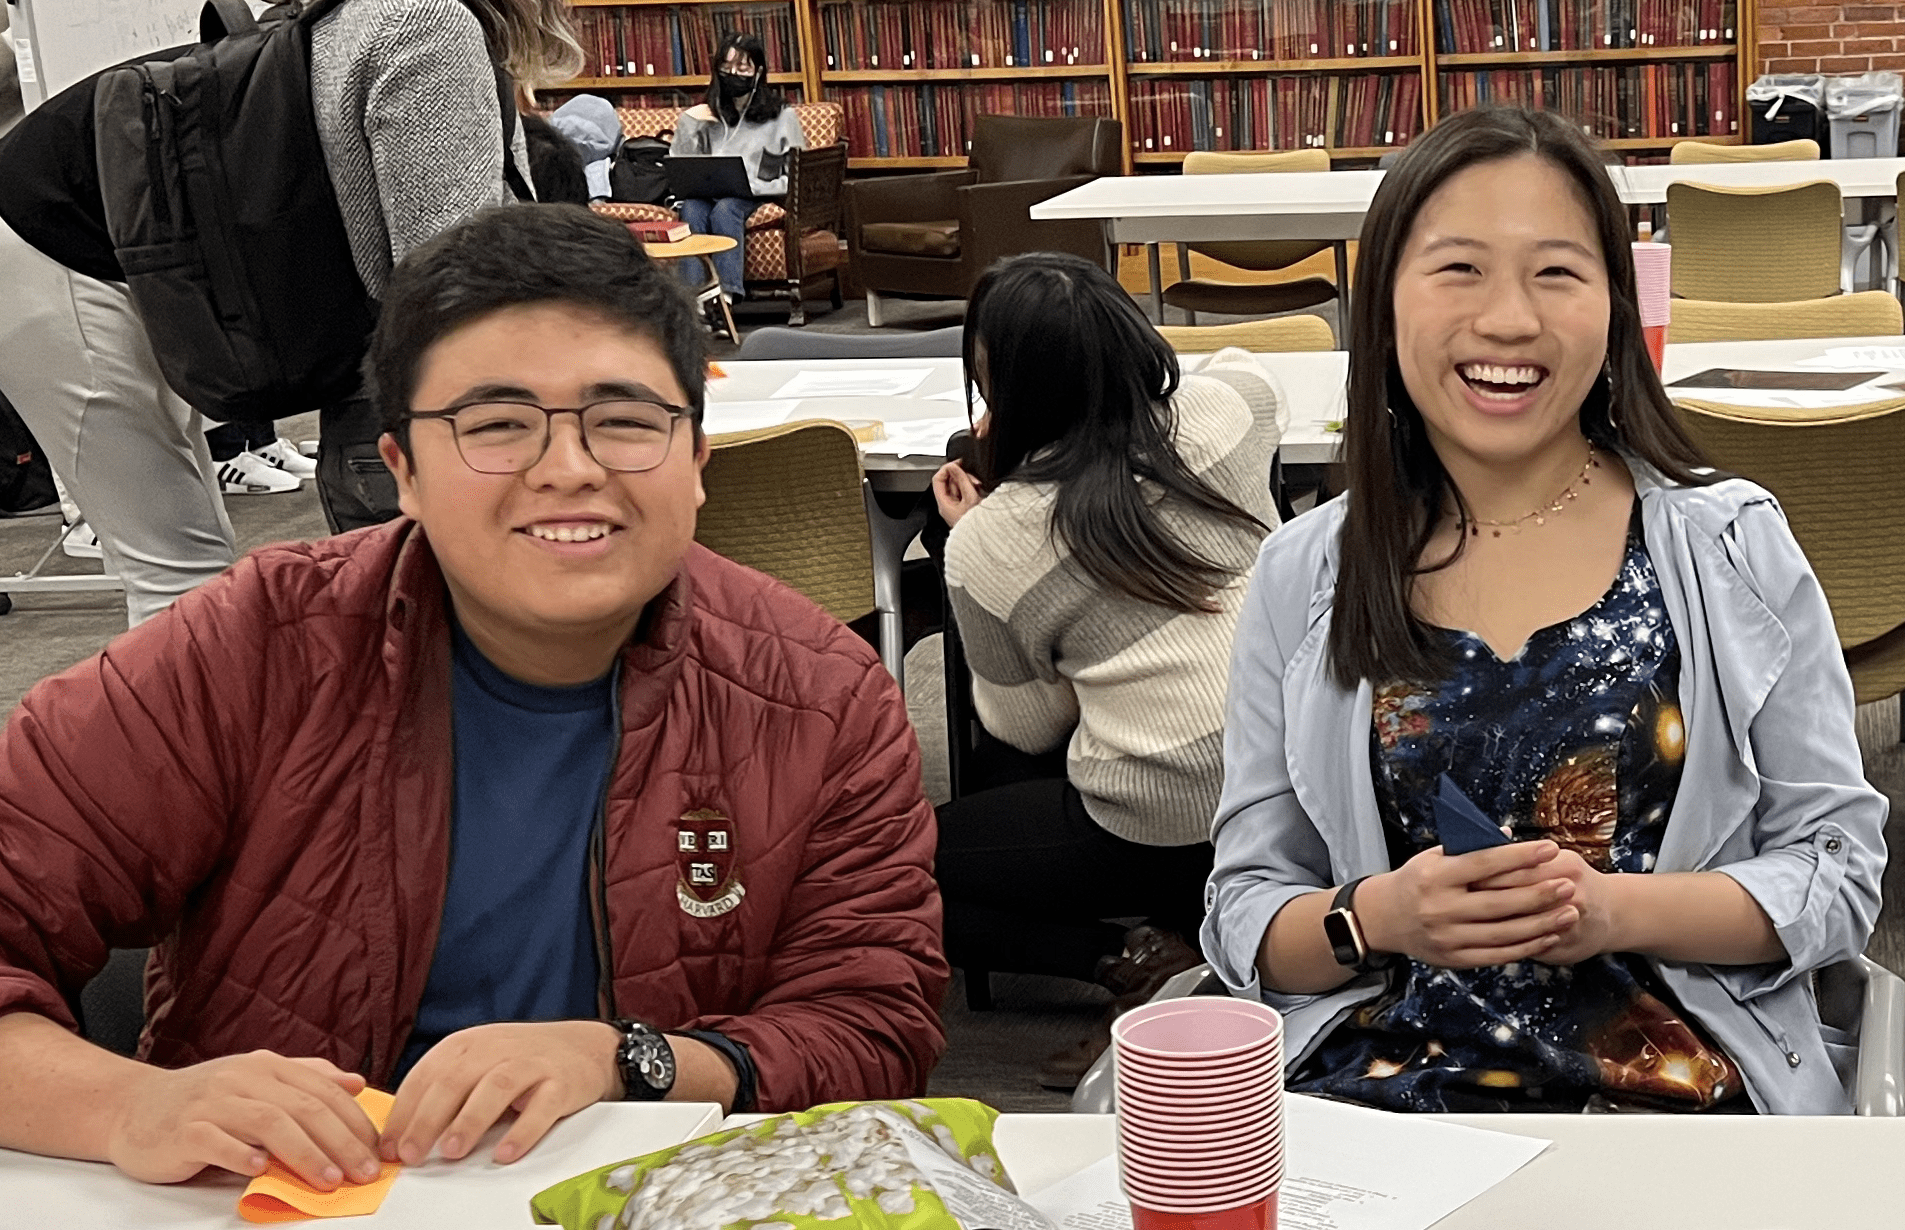 Three students are sitting in the library and smiling at the camera.